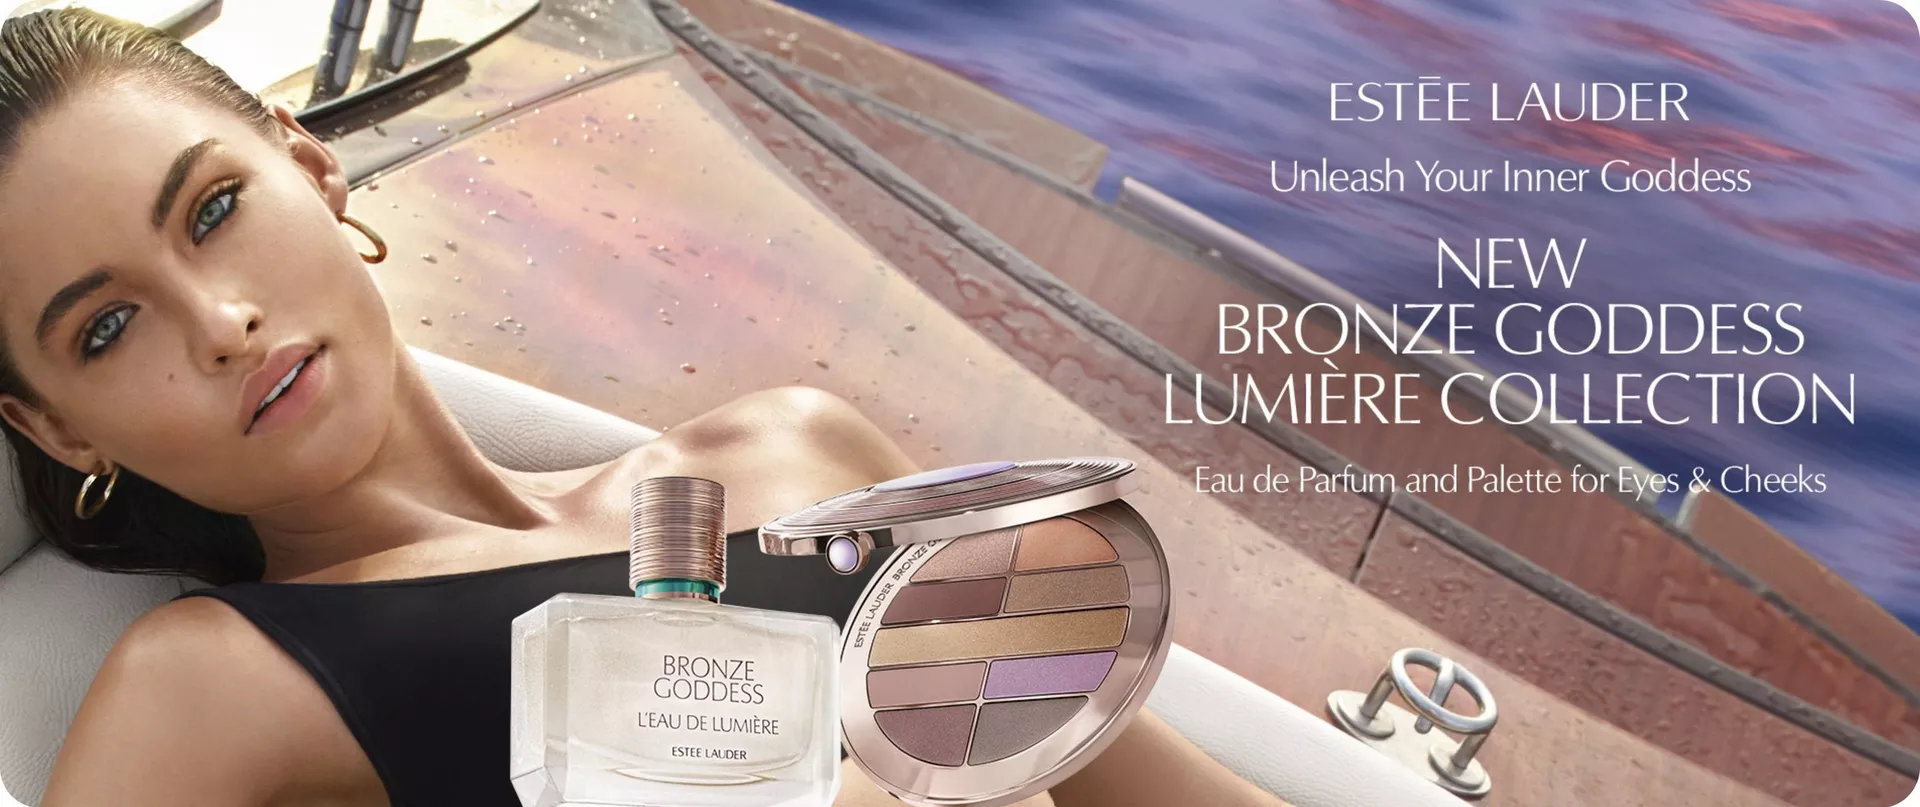 Upto 20% Off on Estee Lauder Bronze Goddess Lumiere's and Foundation's